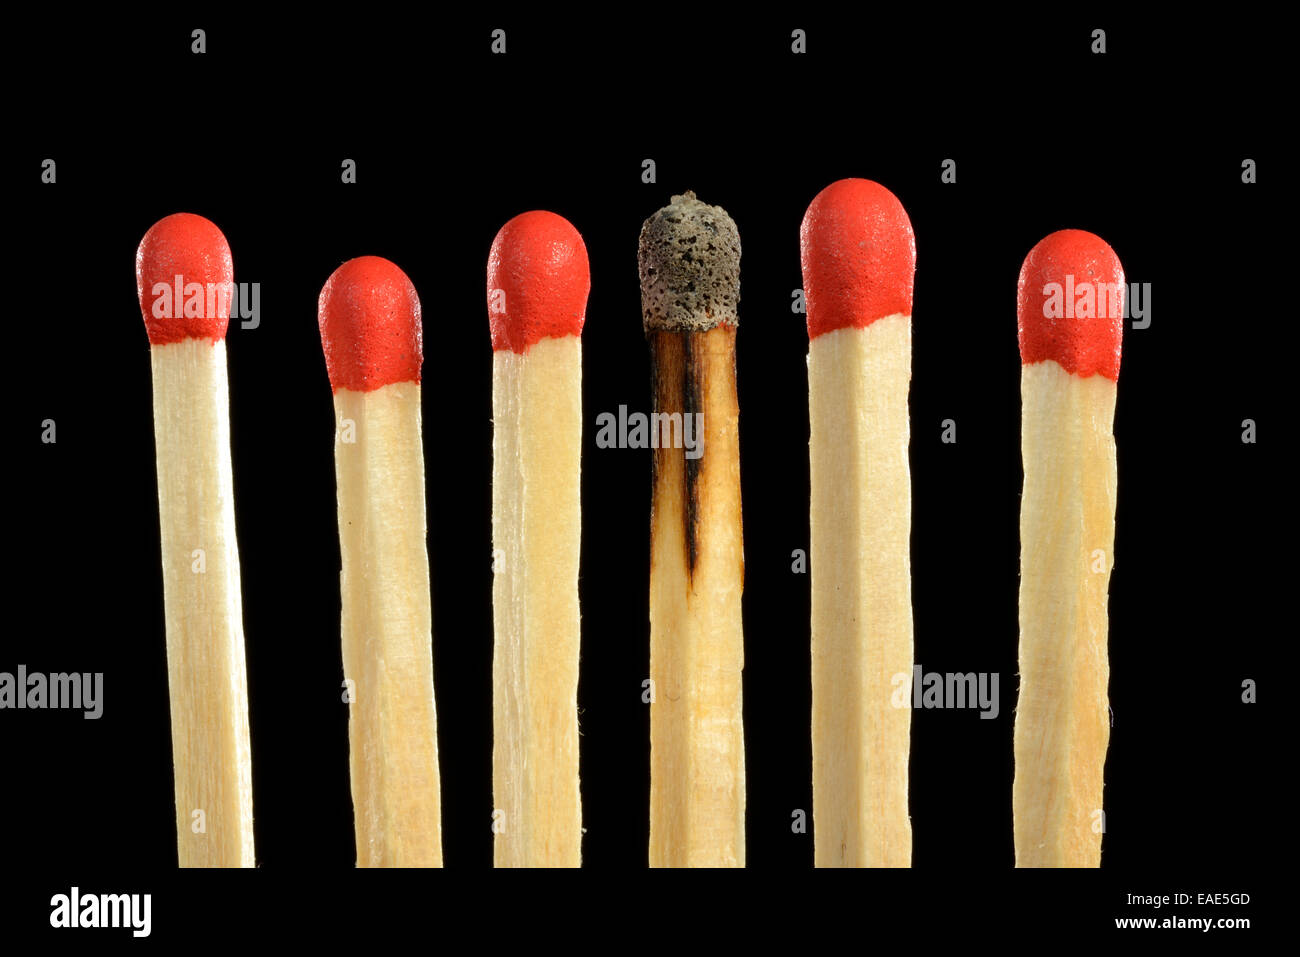 Matches with one burnt match head, symbolic image of burn-out, bullying, exclusion, loner, Germany Stock Photo